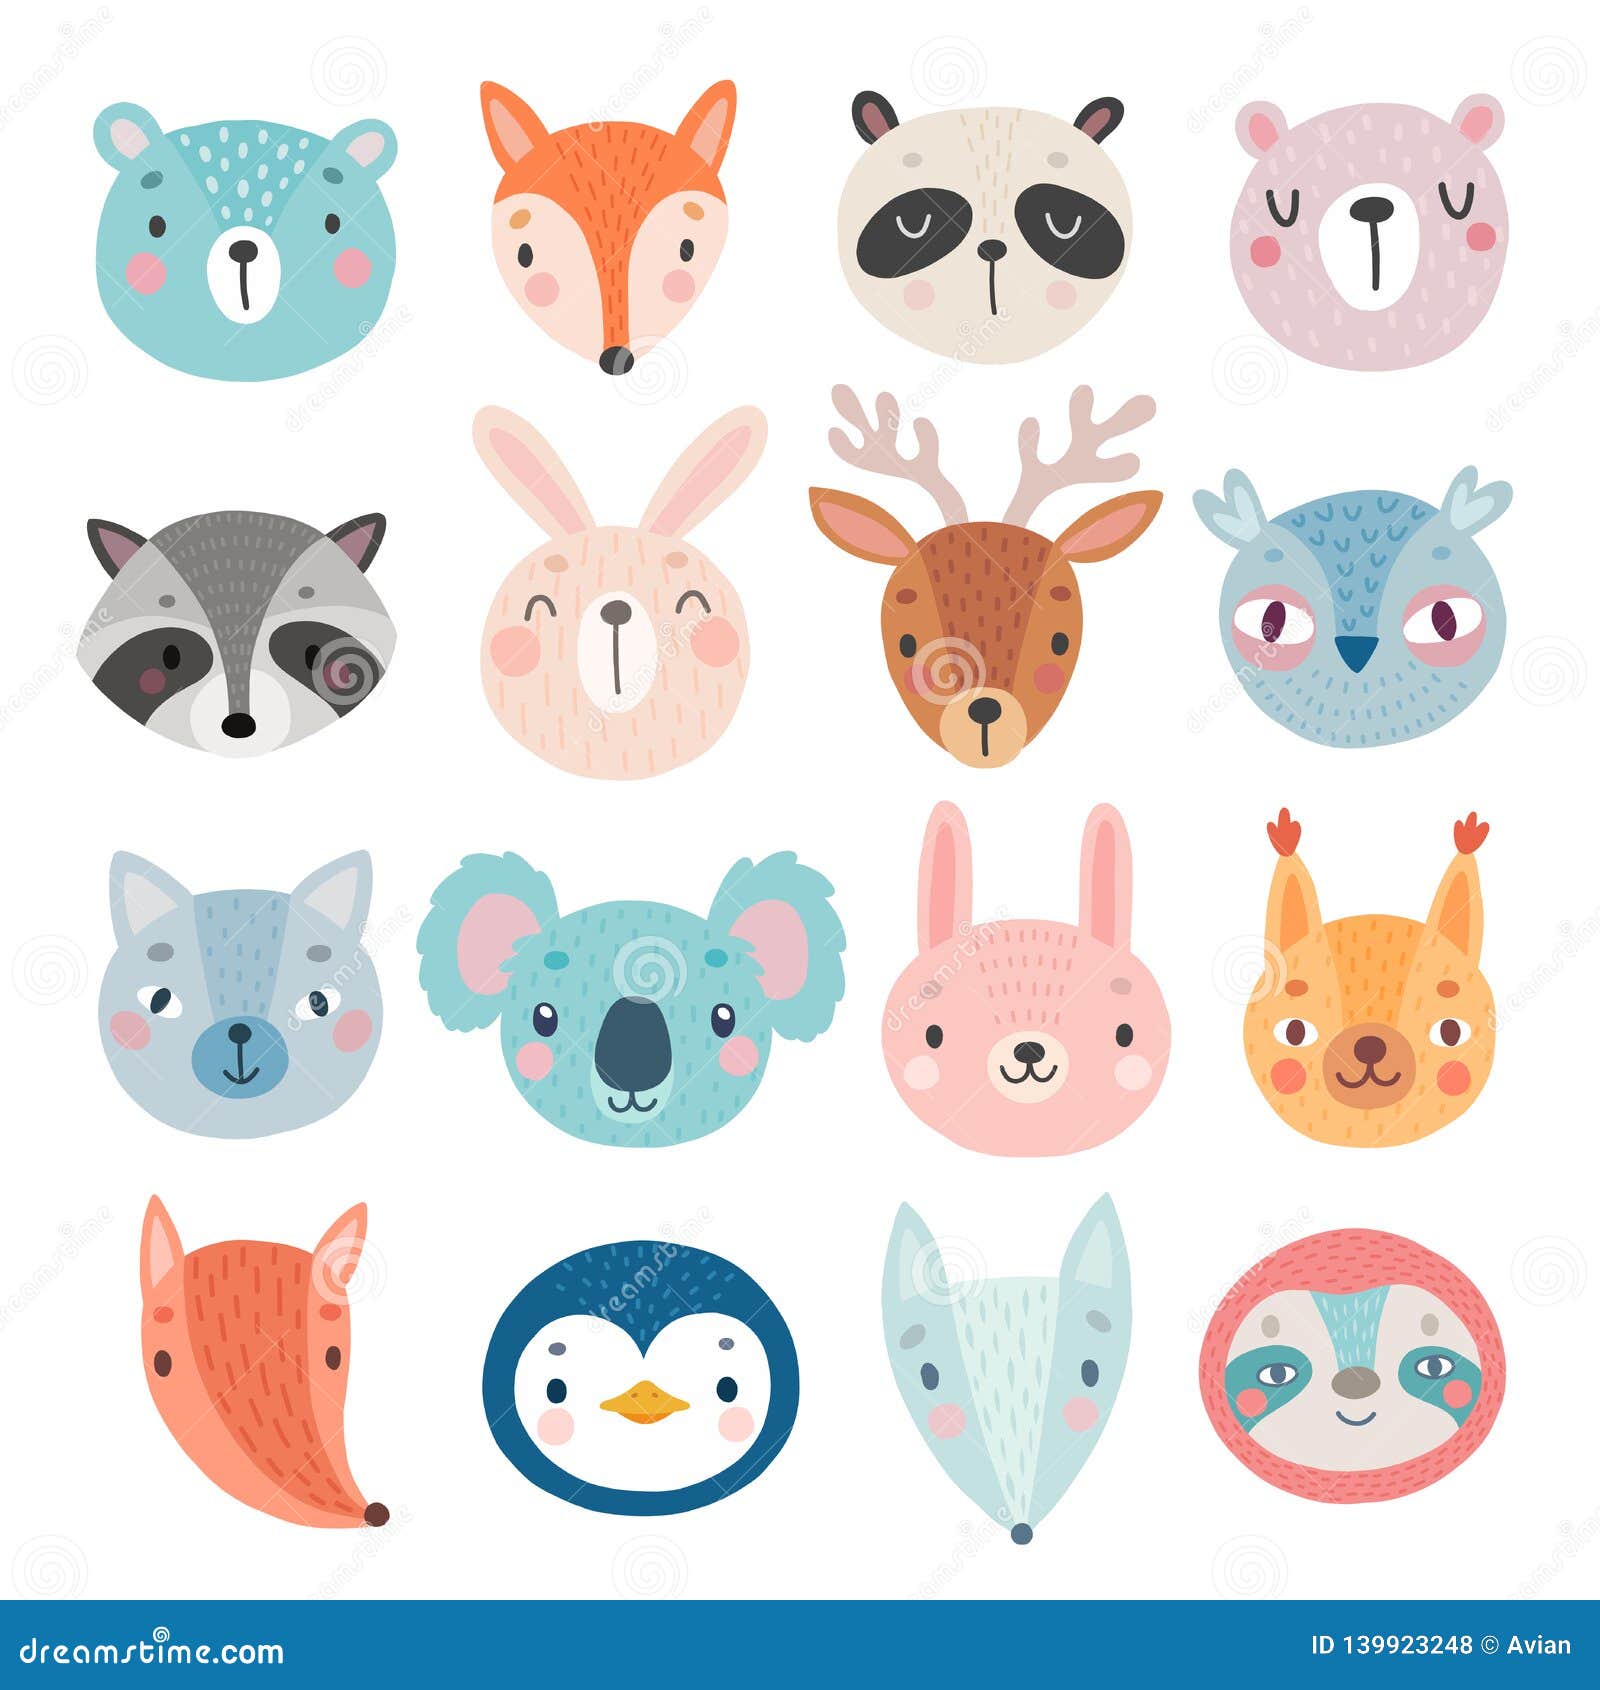 cute woodland characters, bear, fox, raccoon, rabbit, squirrel, deer, owl and others